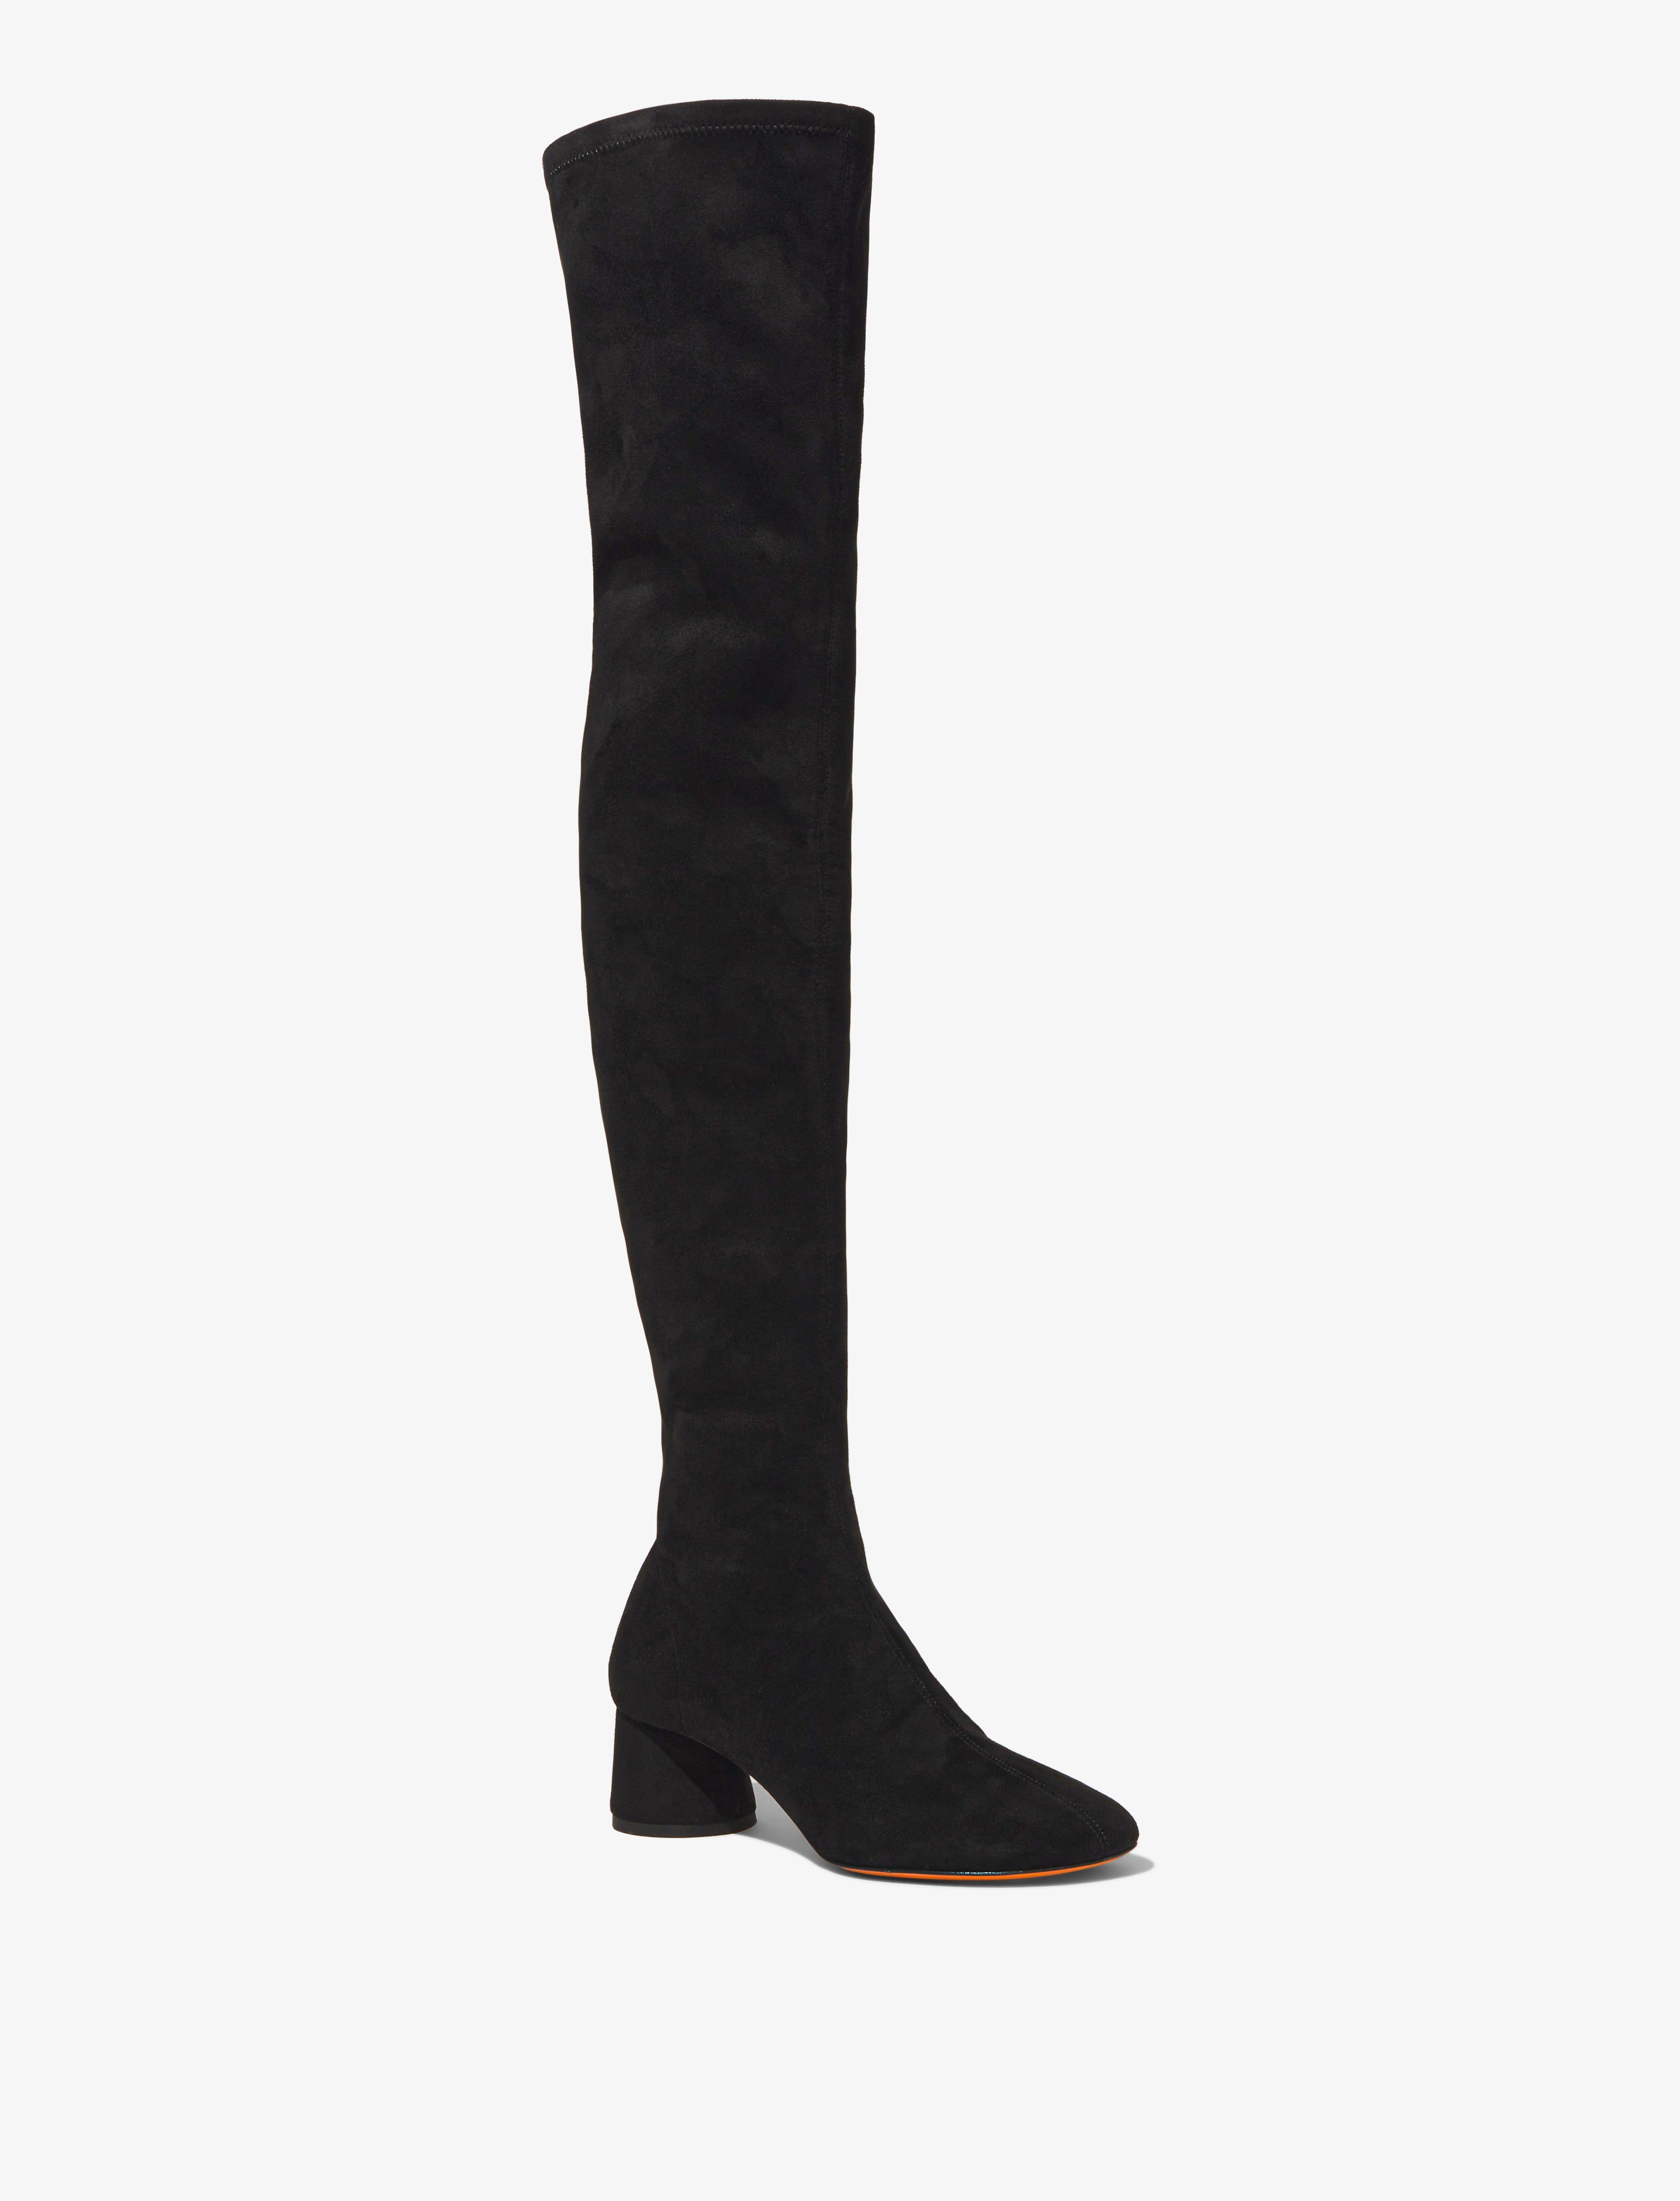 Glove Stretch Over The Knee Boots in Faux Suede - 2